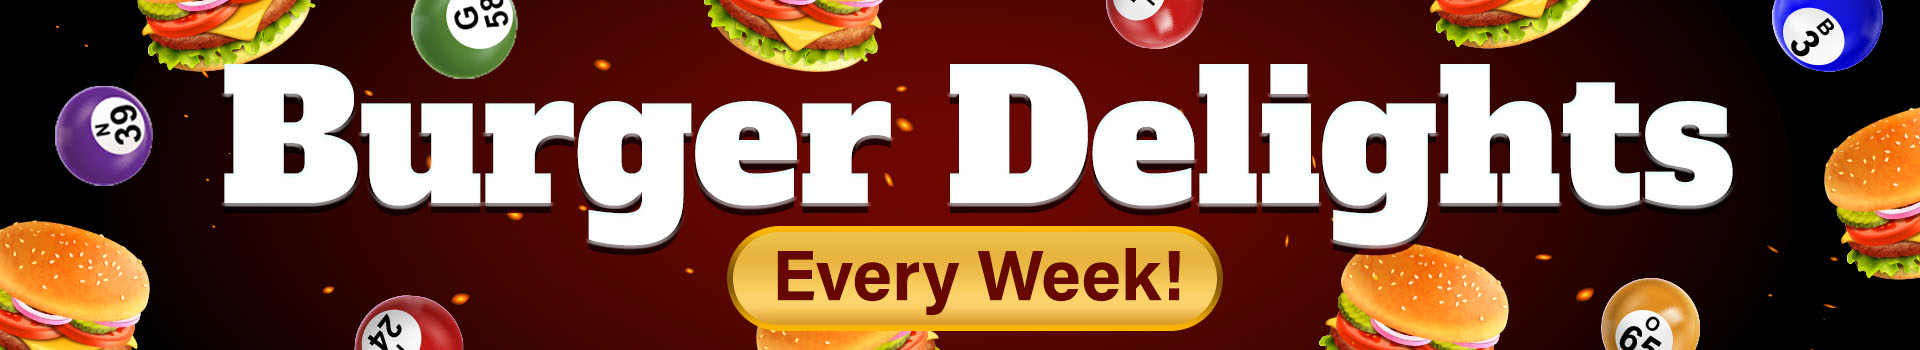 Burger Delights banners